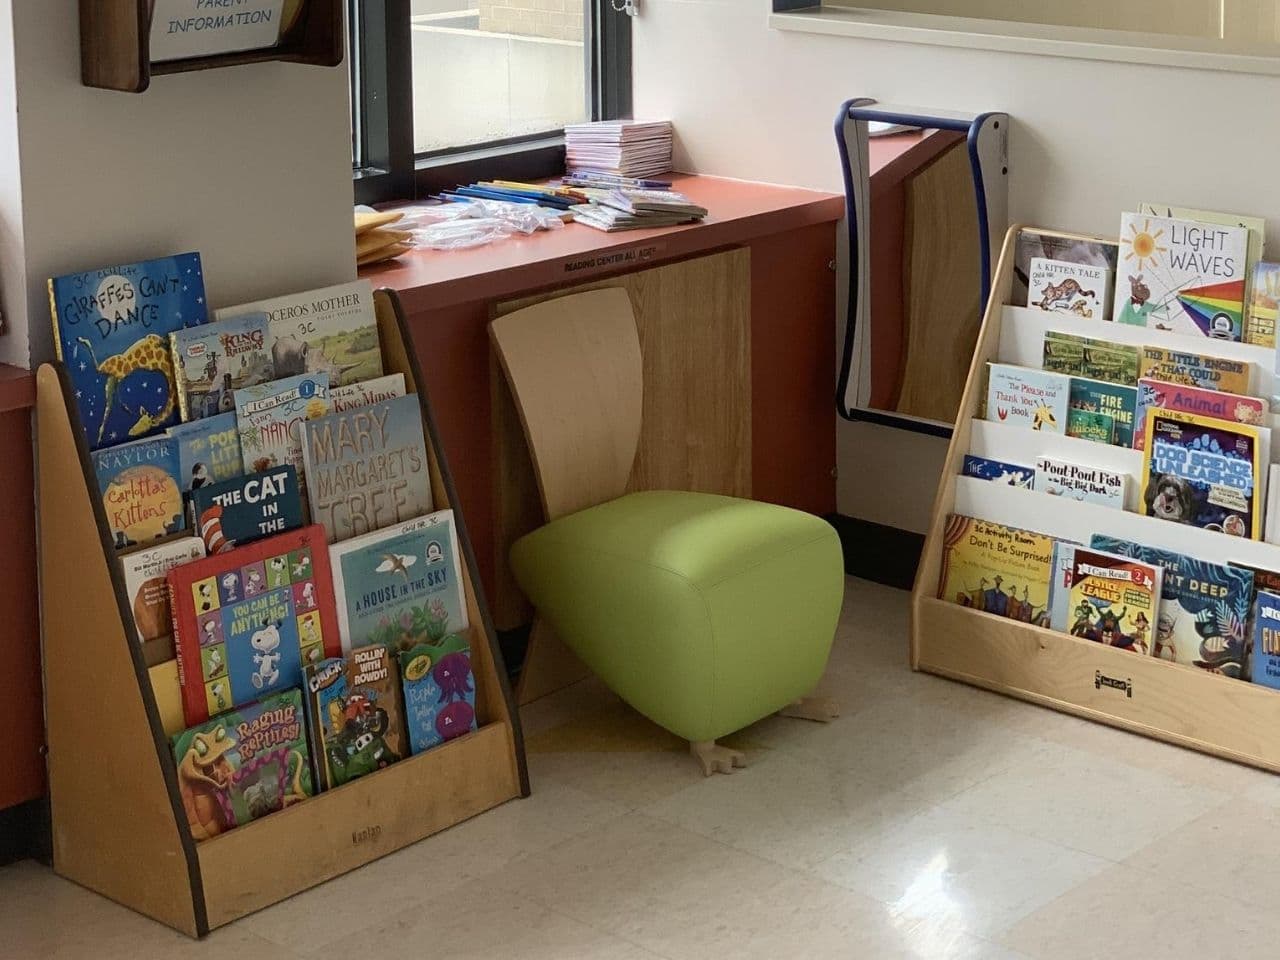 The playroom has magazine racks with numerous copies of kids' publications and books.